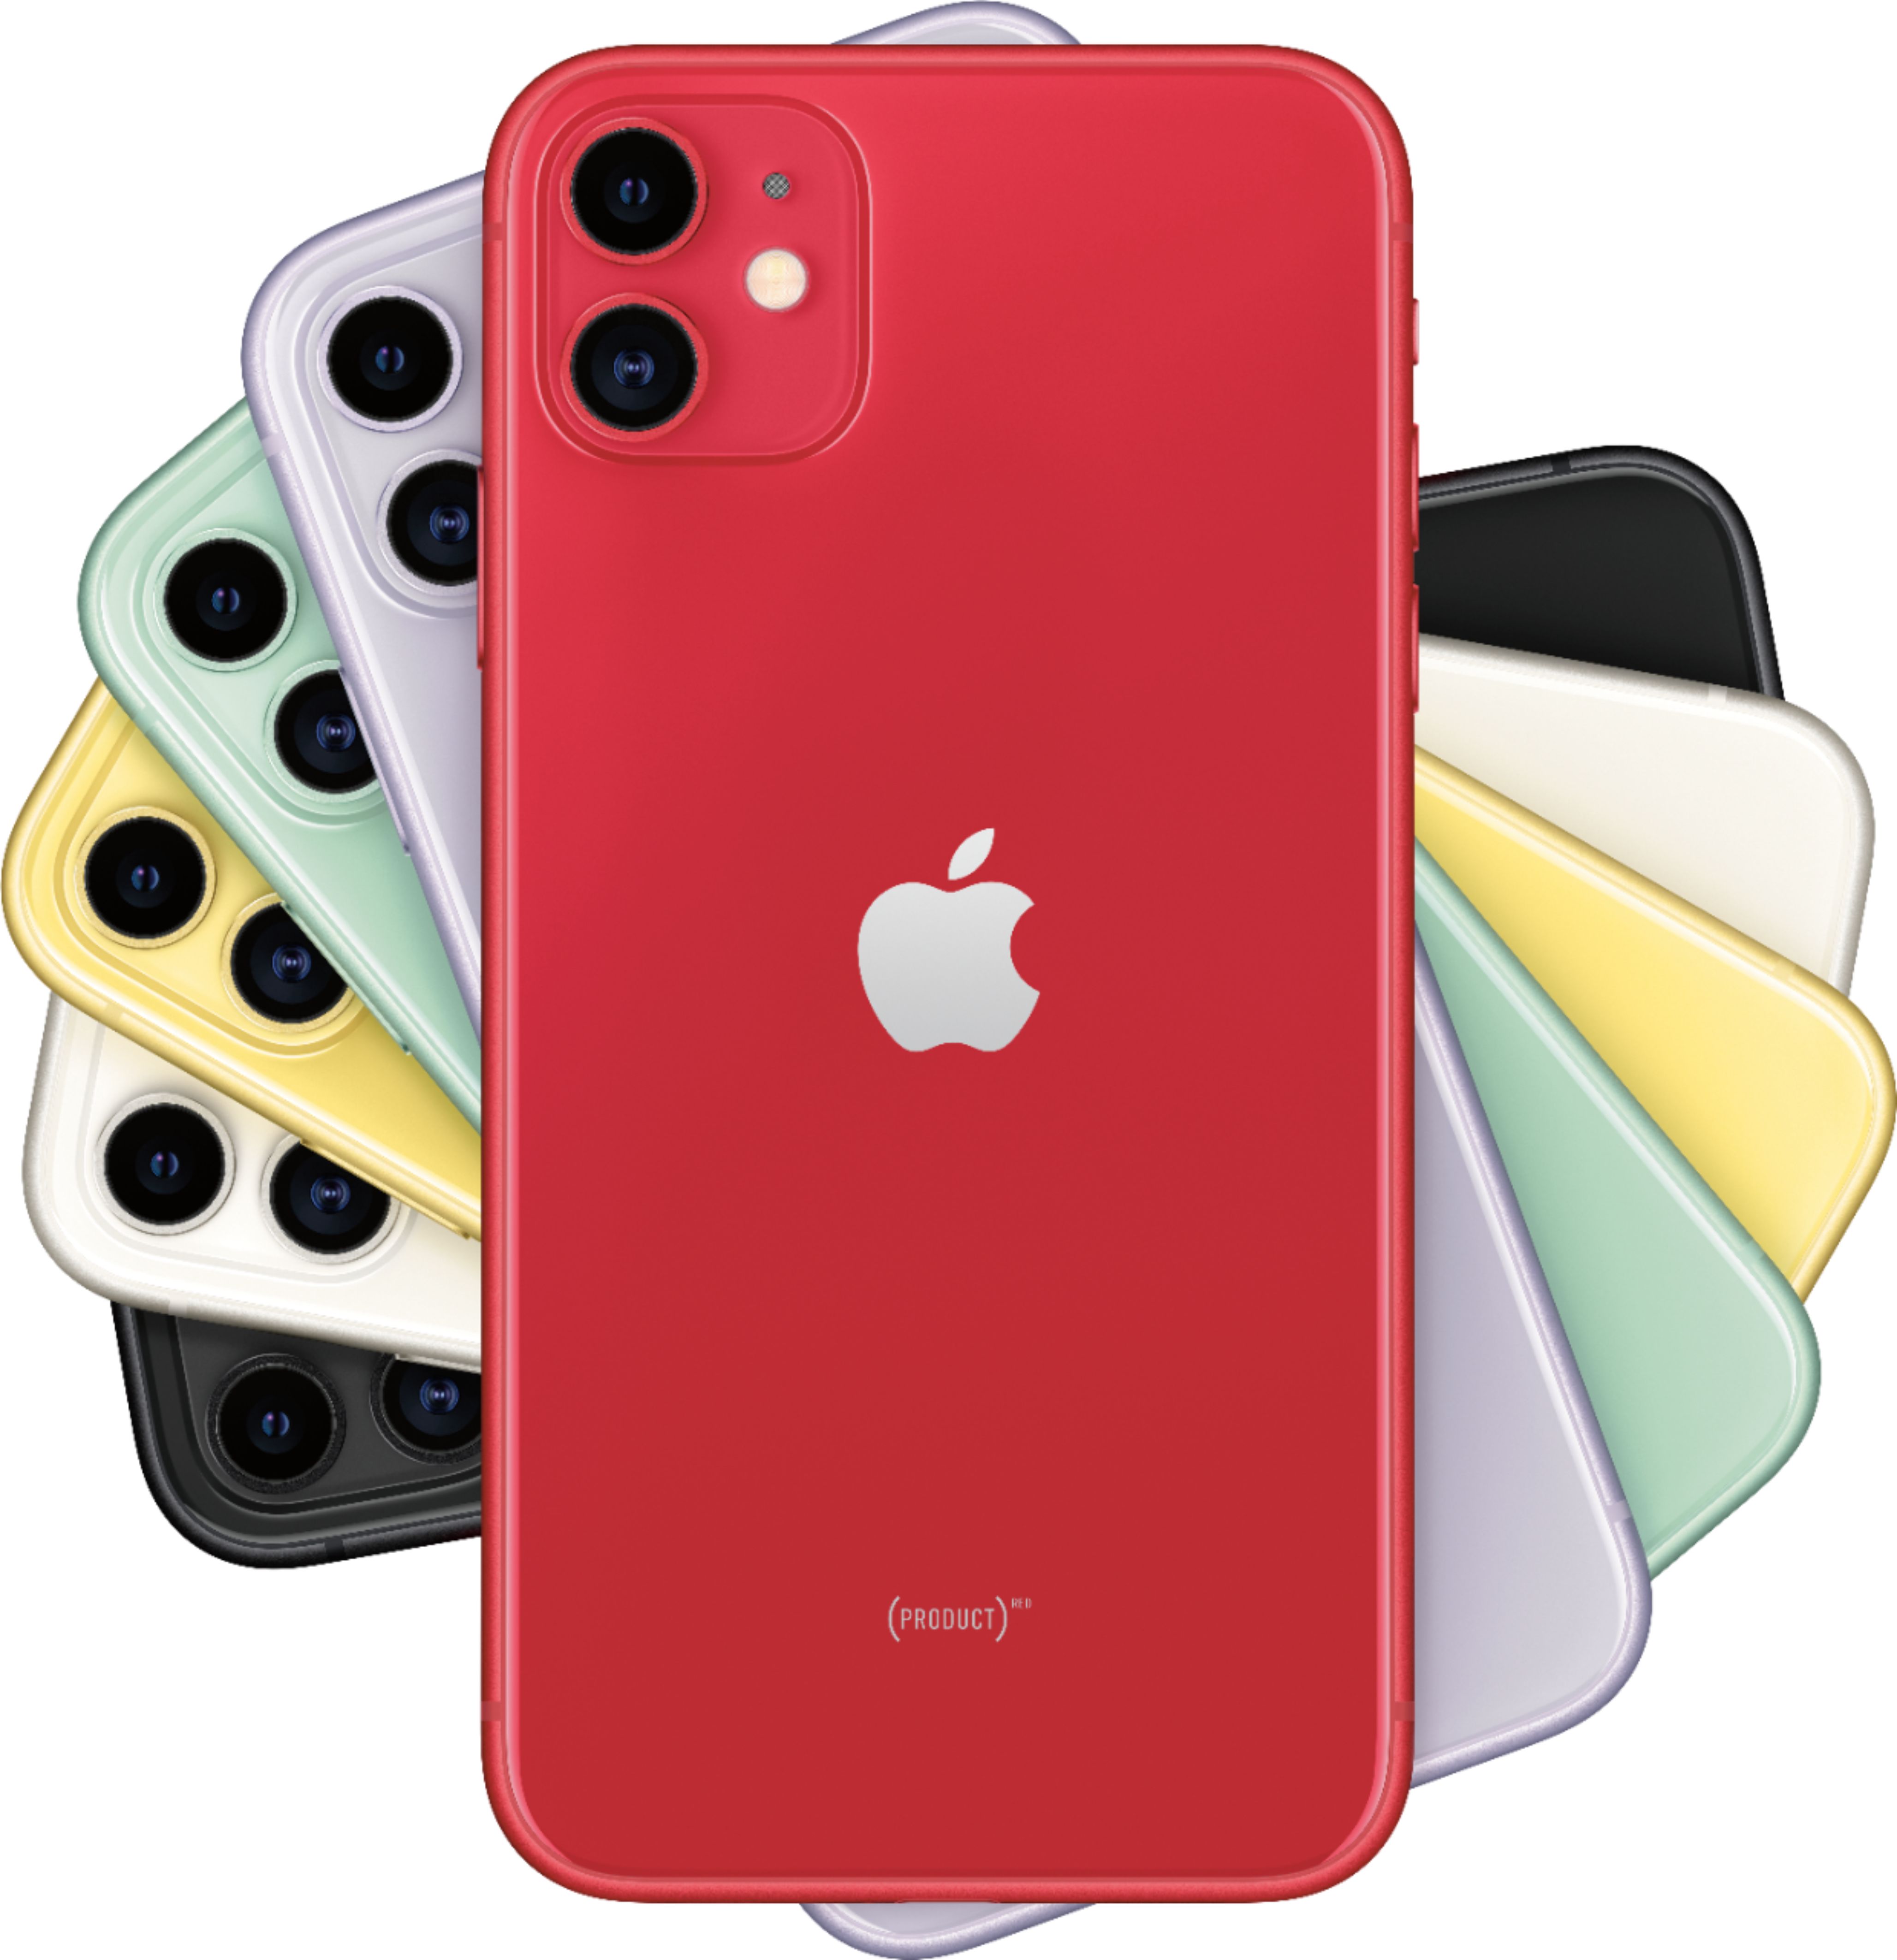 Apple Iphone 11 128gb Product Red Verizon Mwlg2ll A Best Buy